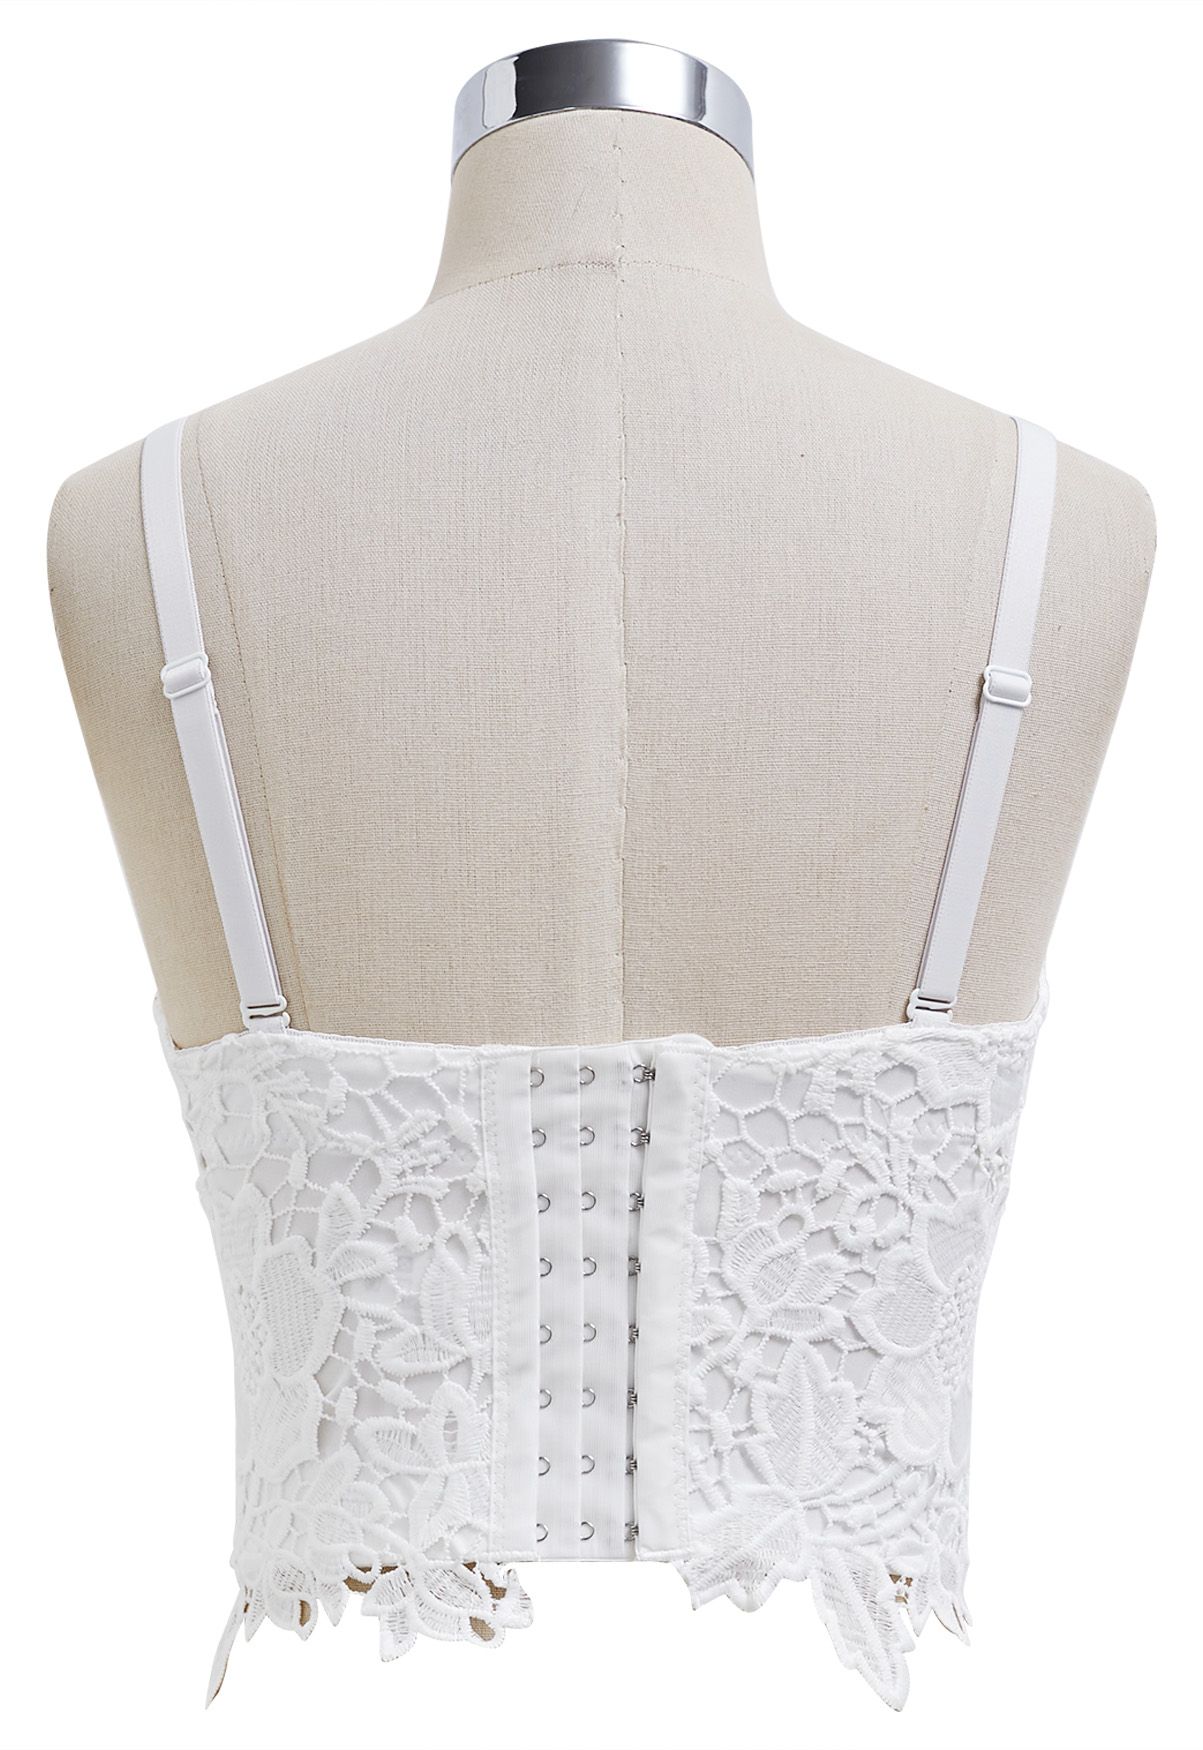 Floral Cutwork Lace Bustier Crop Top in White